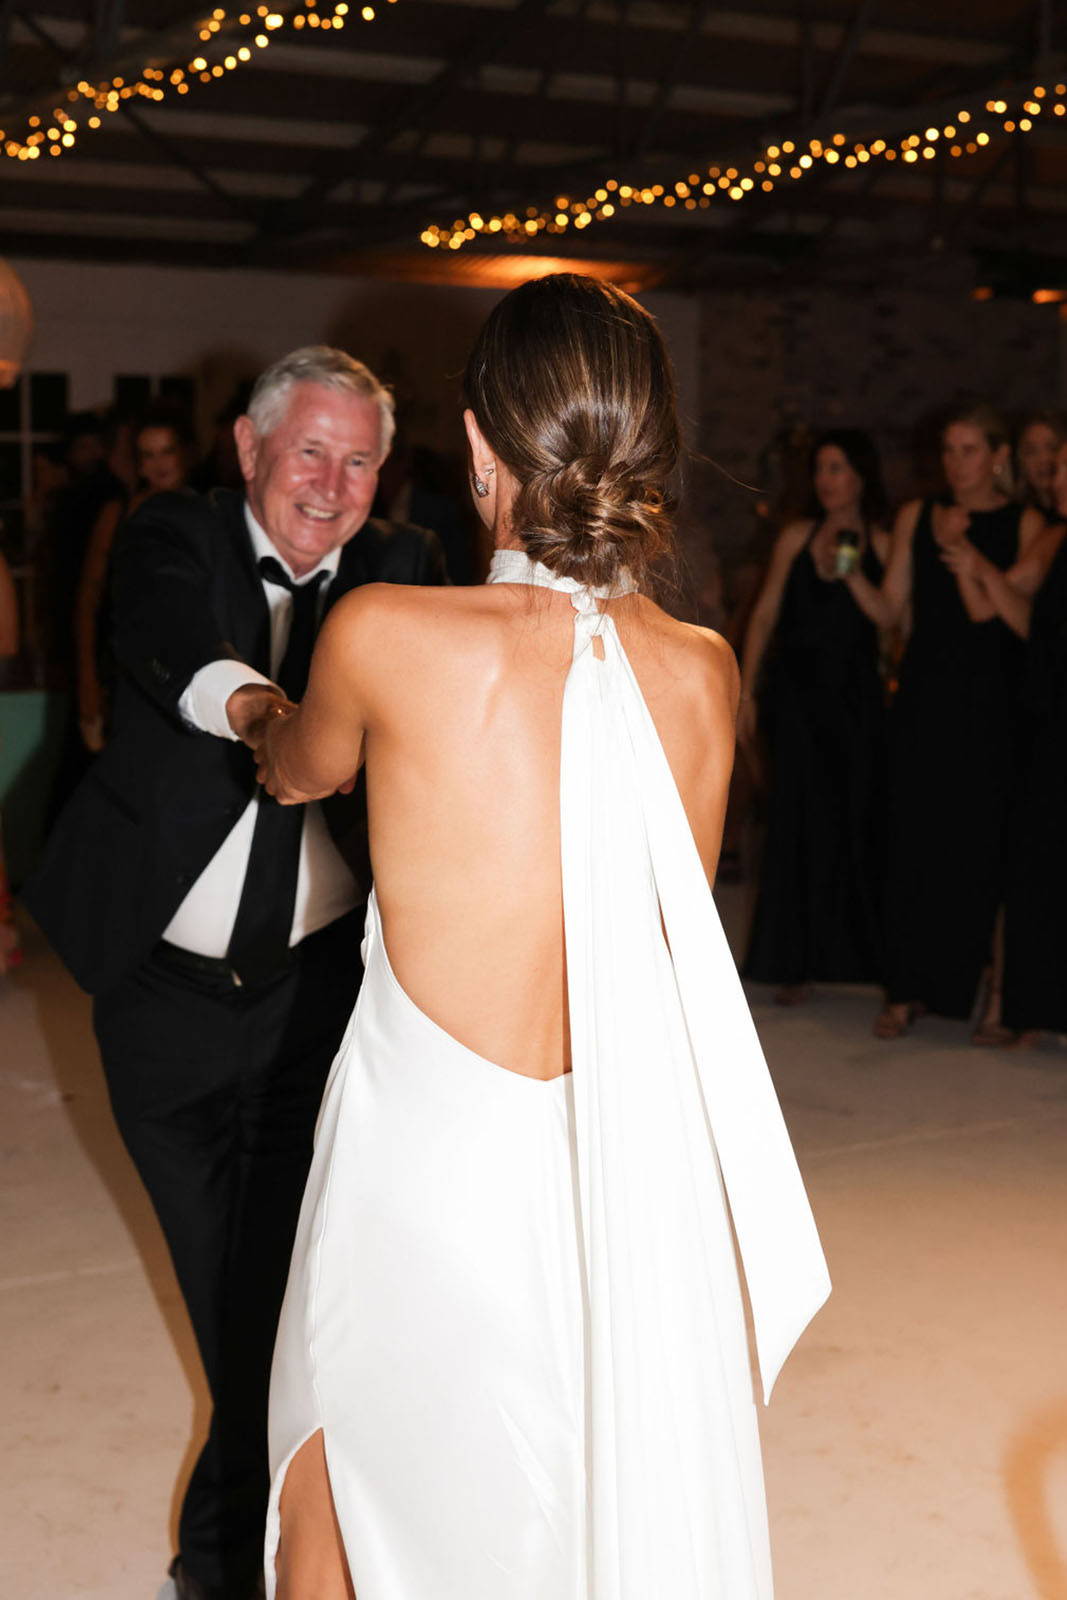 Father of the bride first dance.